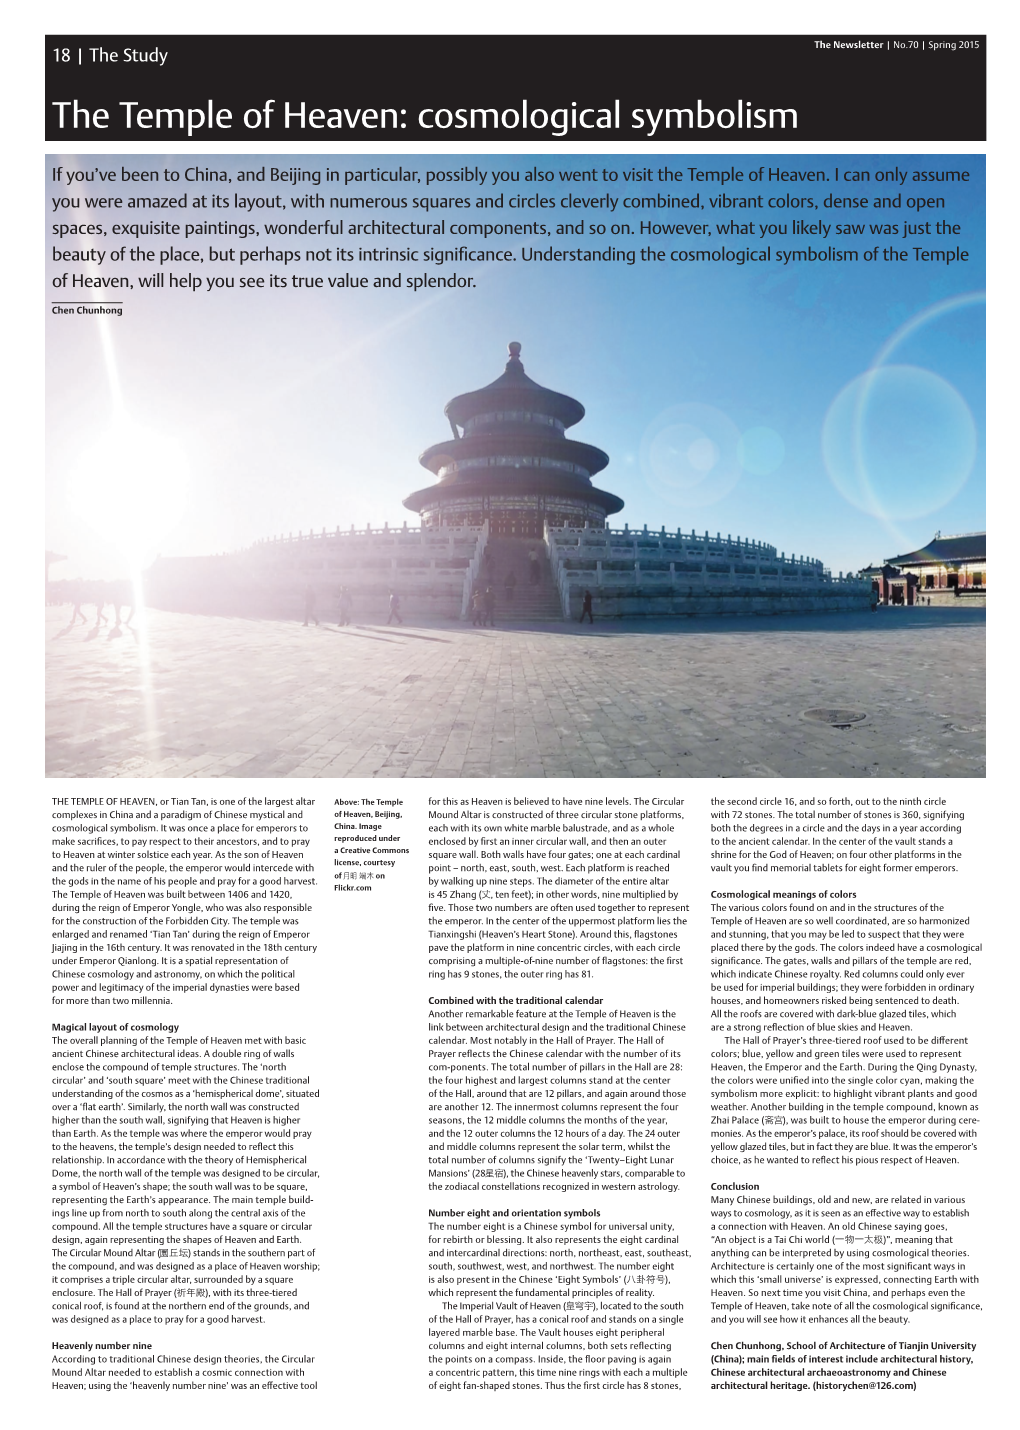 The Temple of Heaven: Cosmological Symbolism